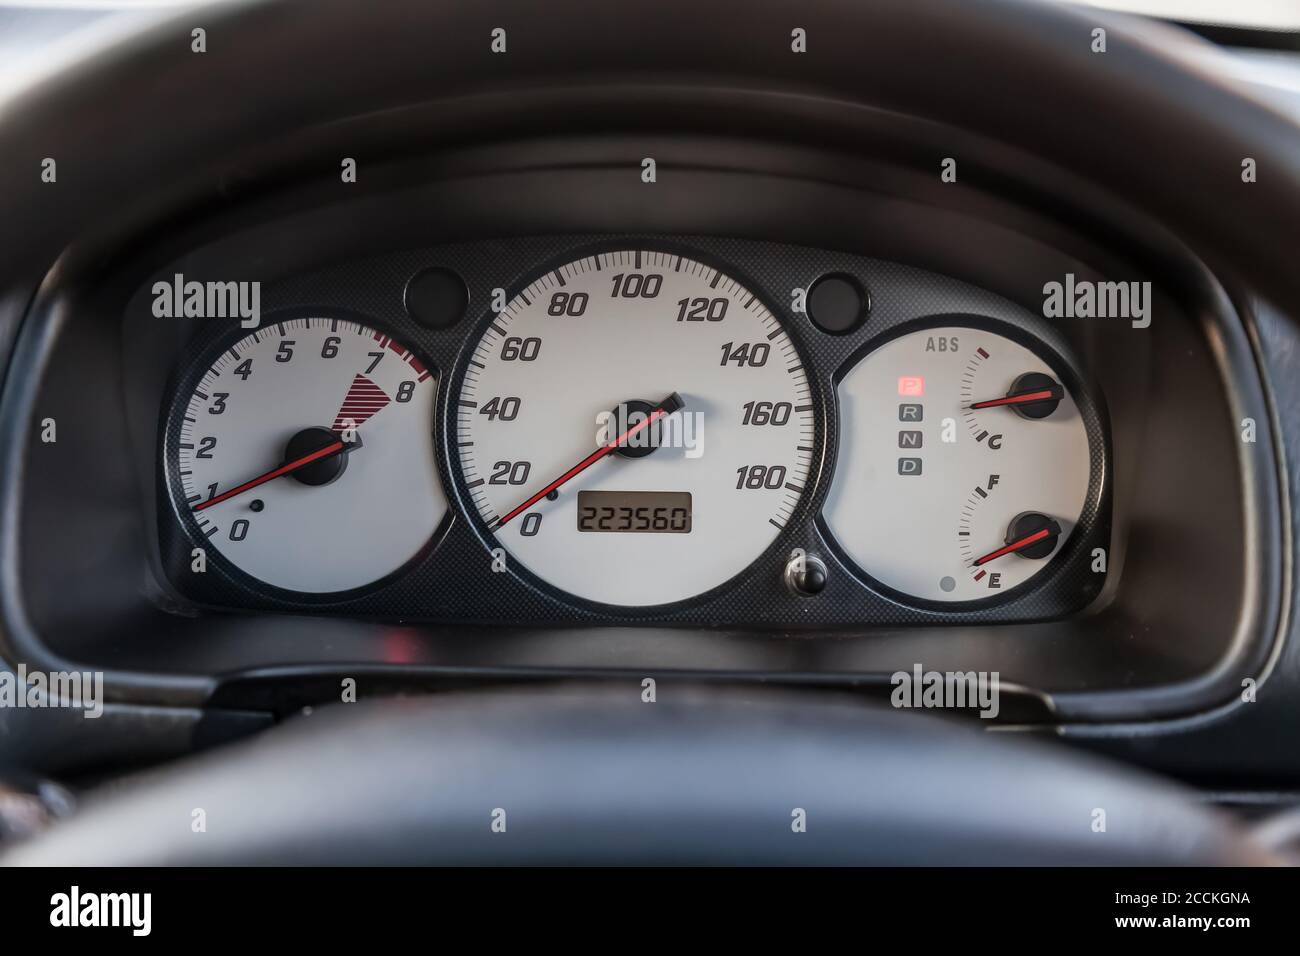 Dials In A Car High Resolution Stock Photography and Images - Alamy